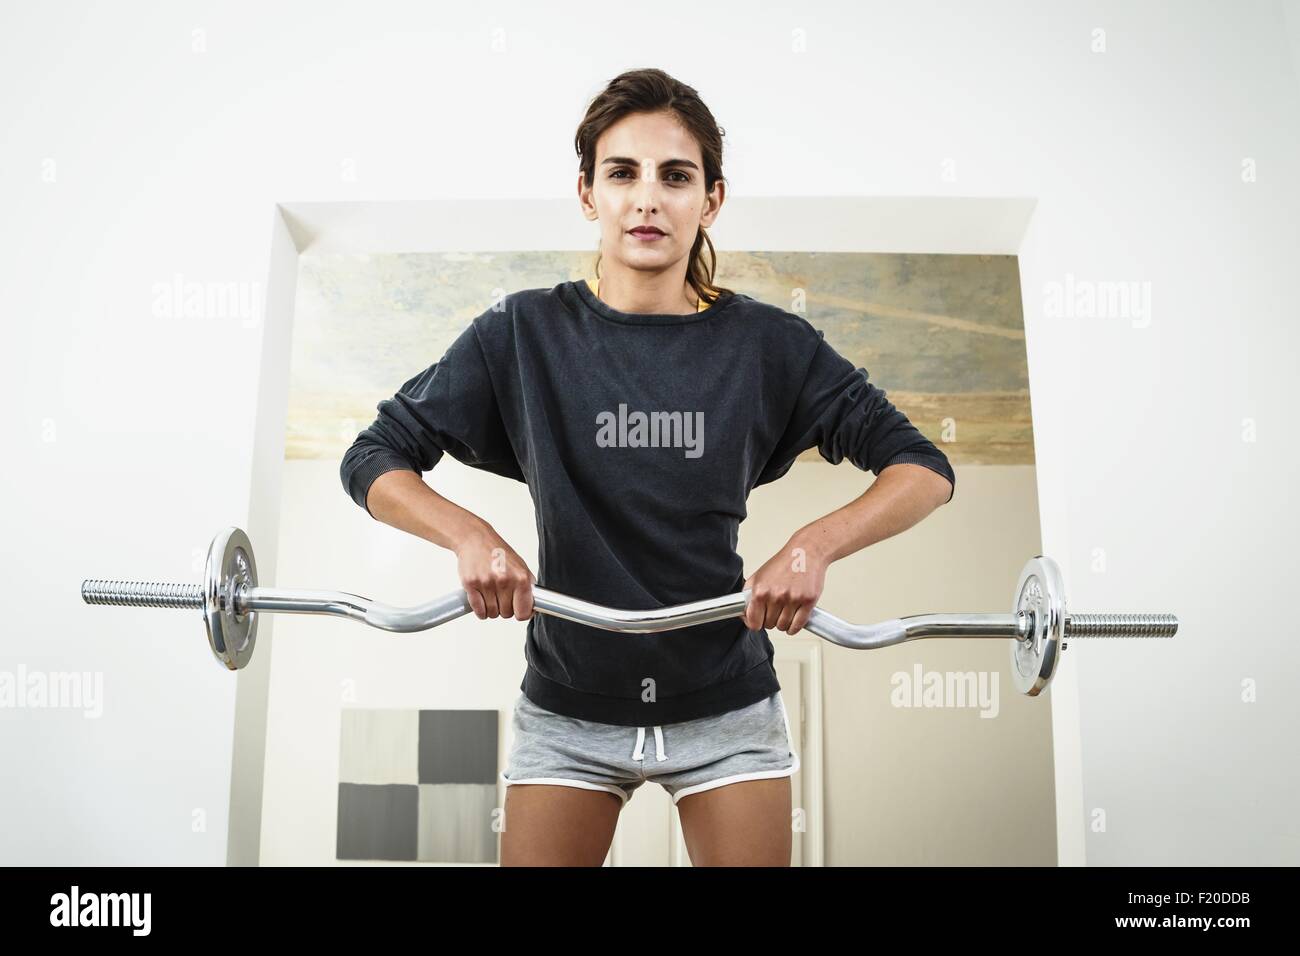 Young woman lifting barbell in living room Stock Photo